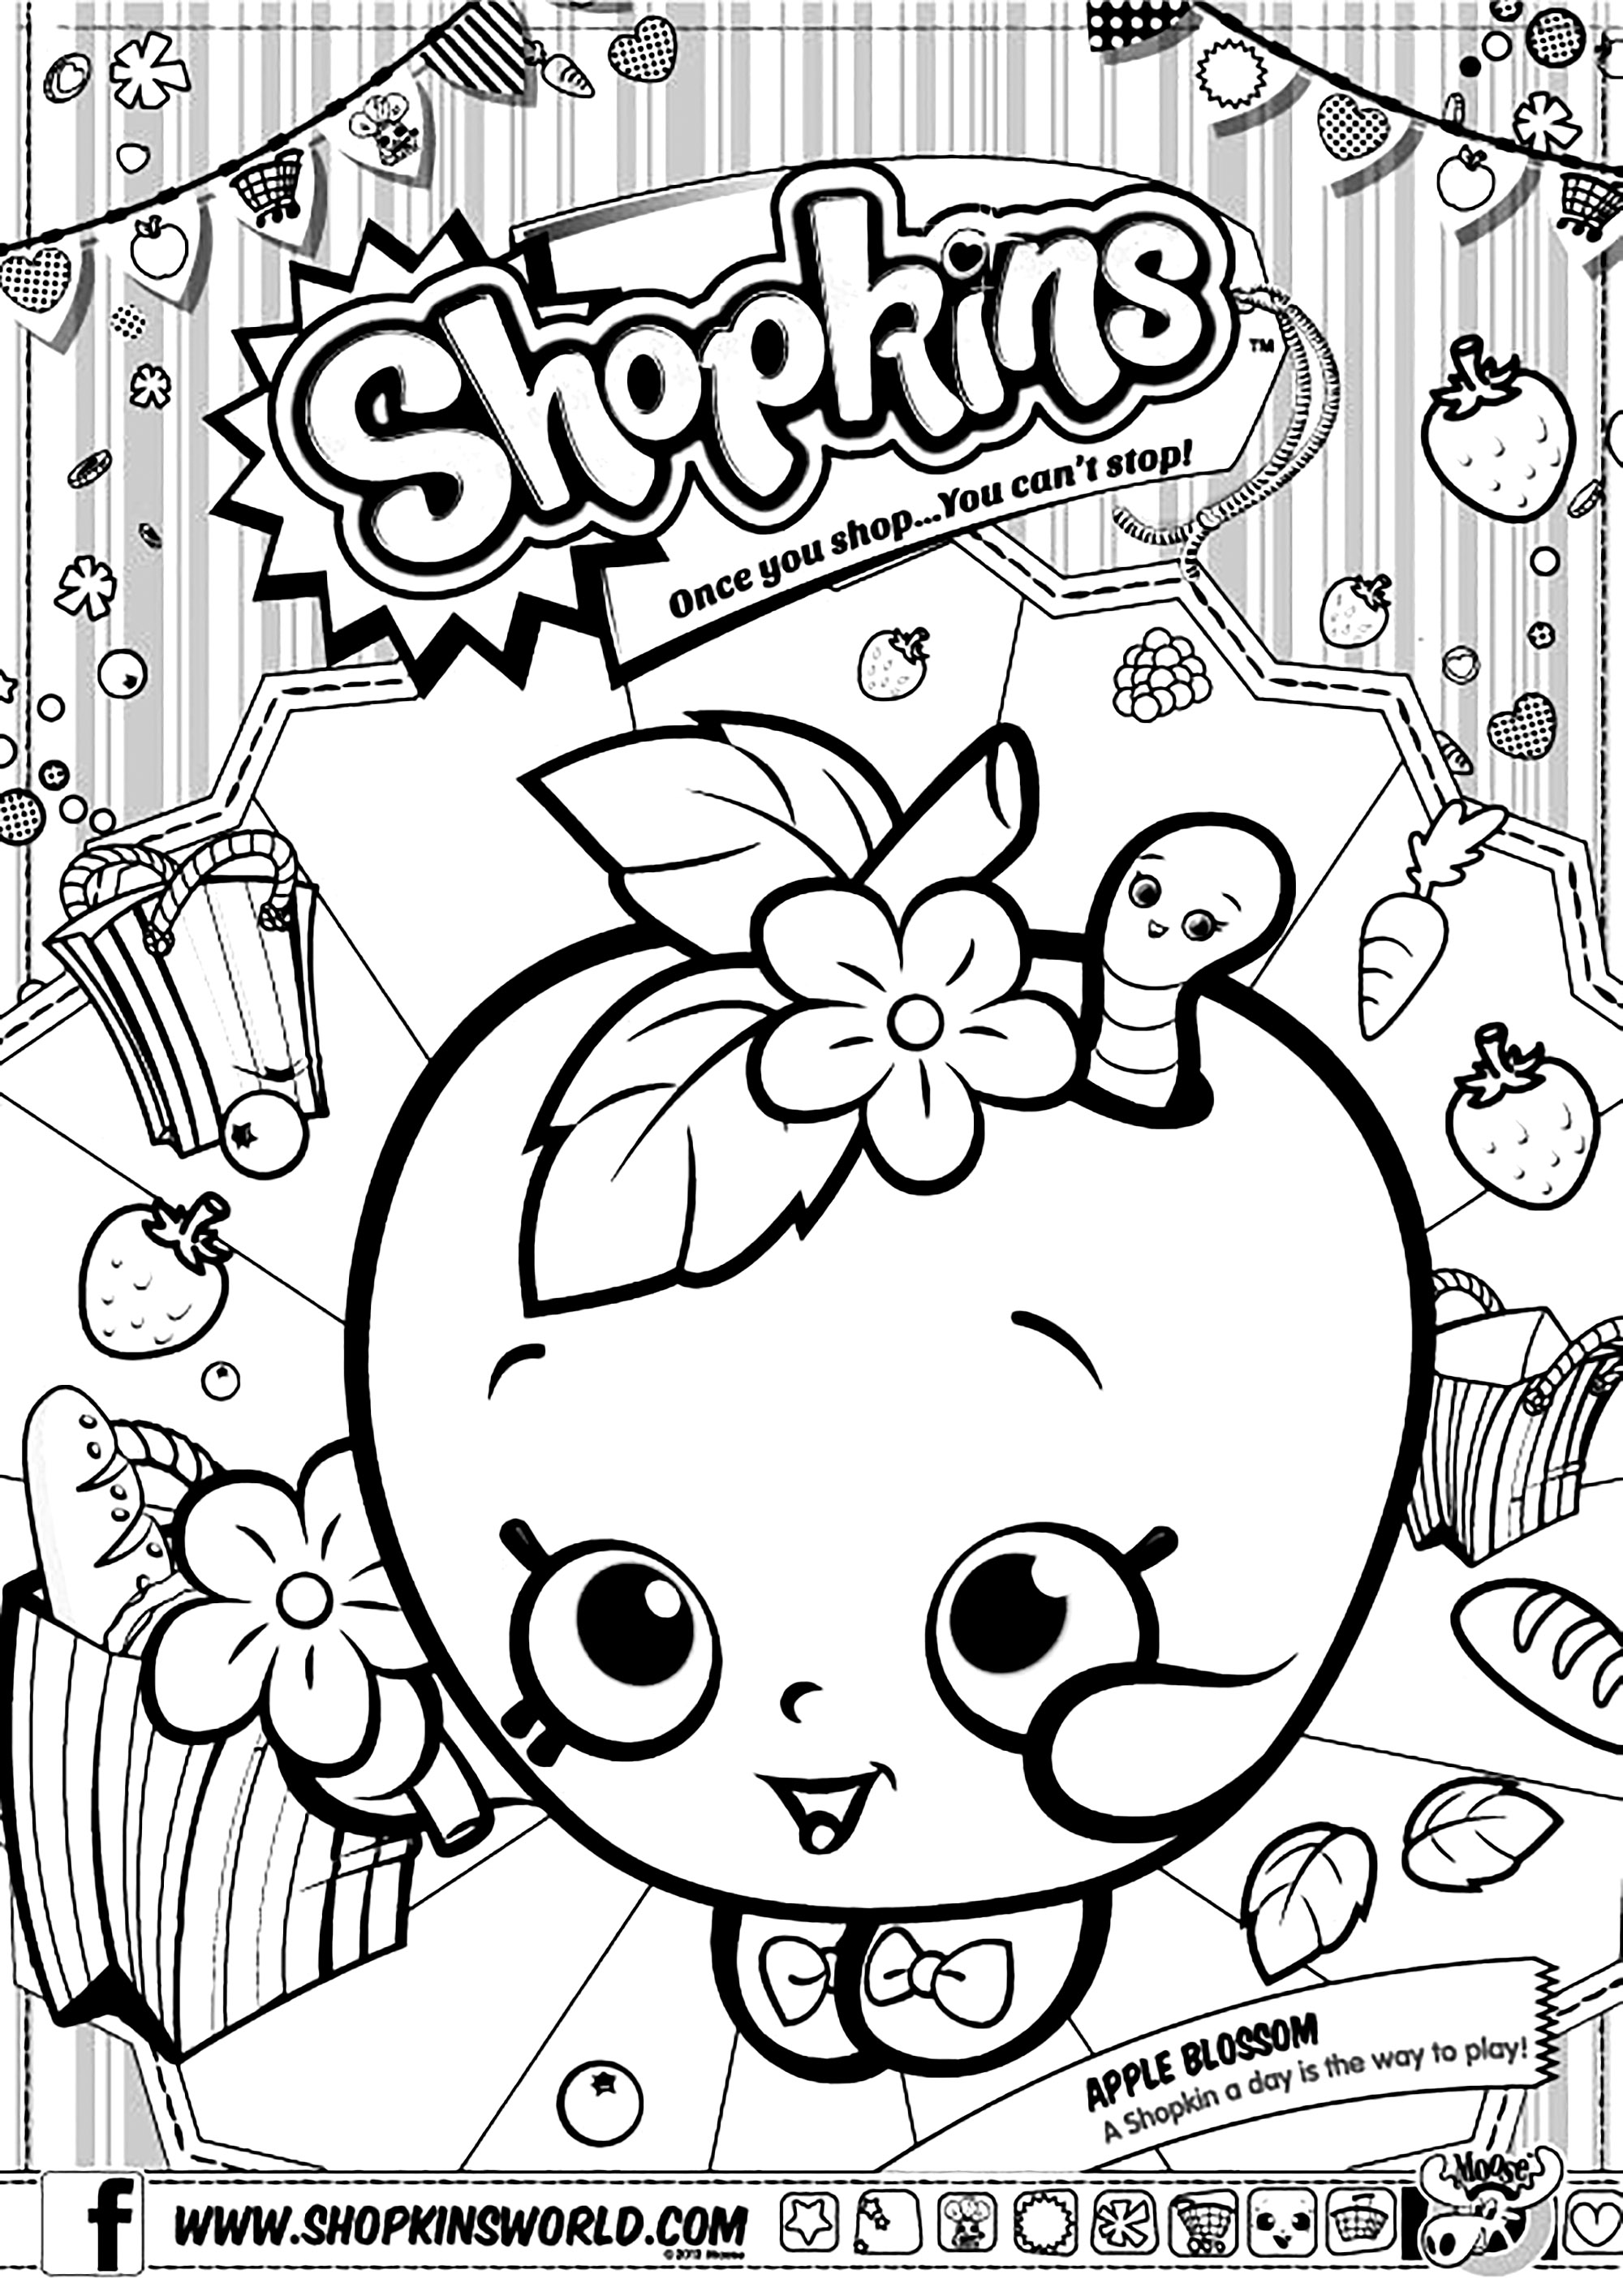 Shopkins coloring page to print and color for free